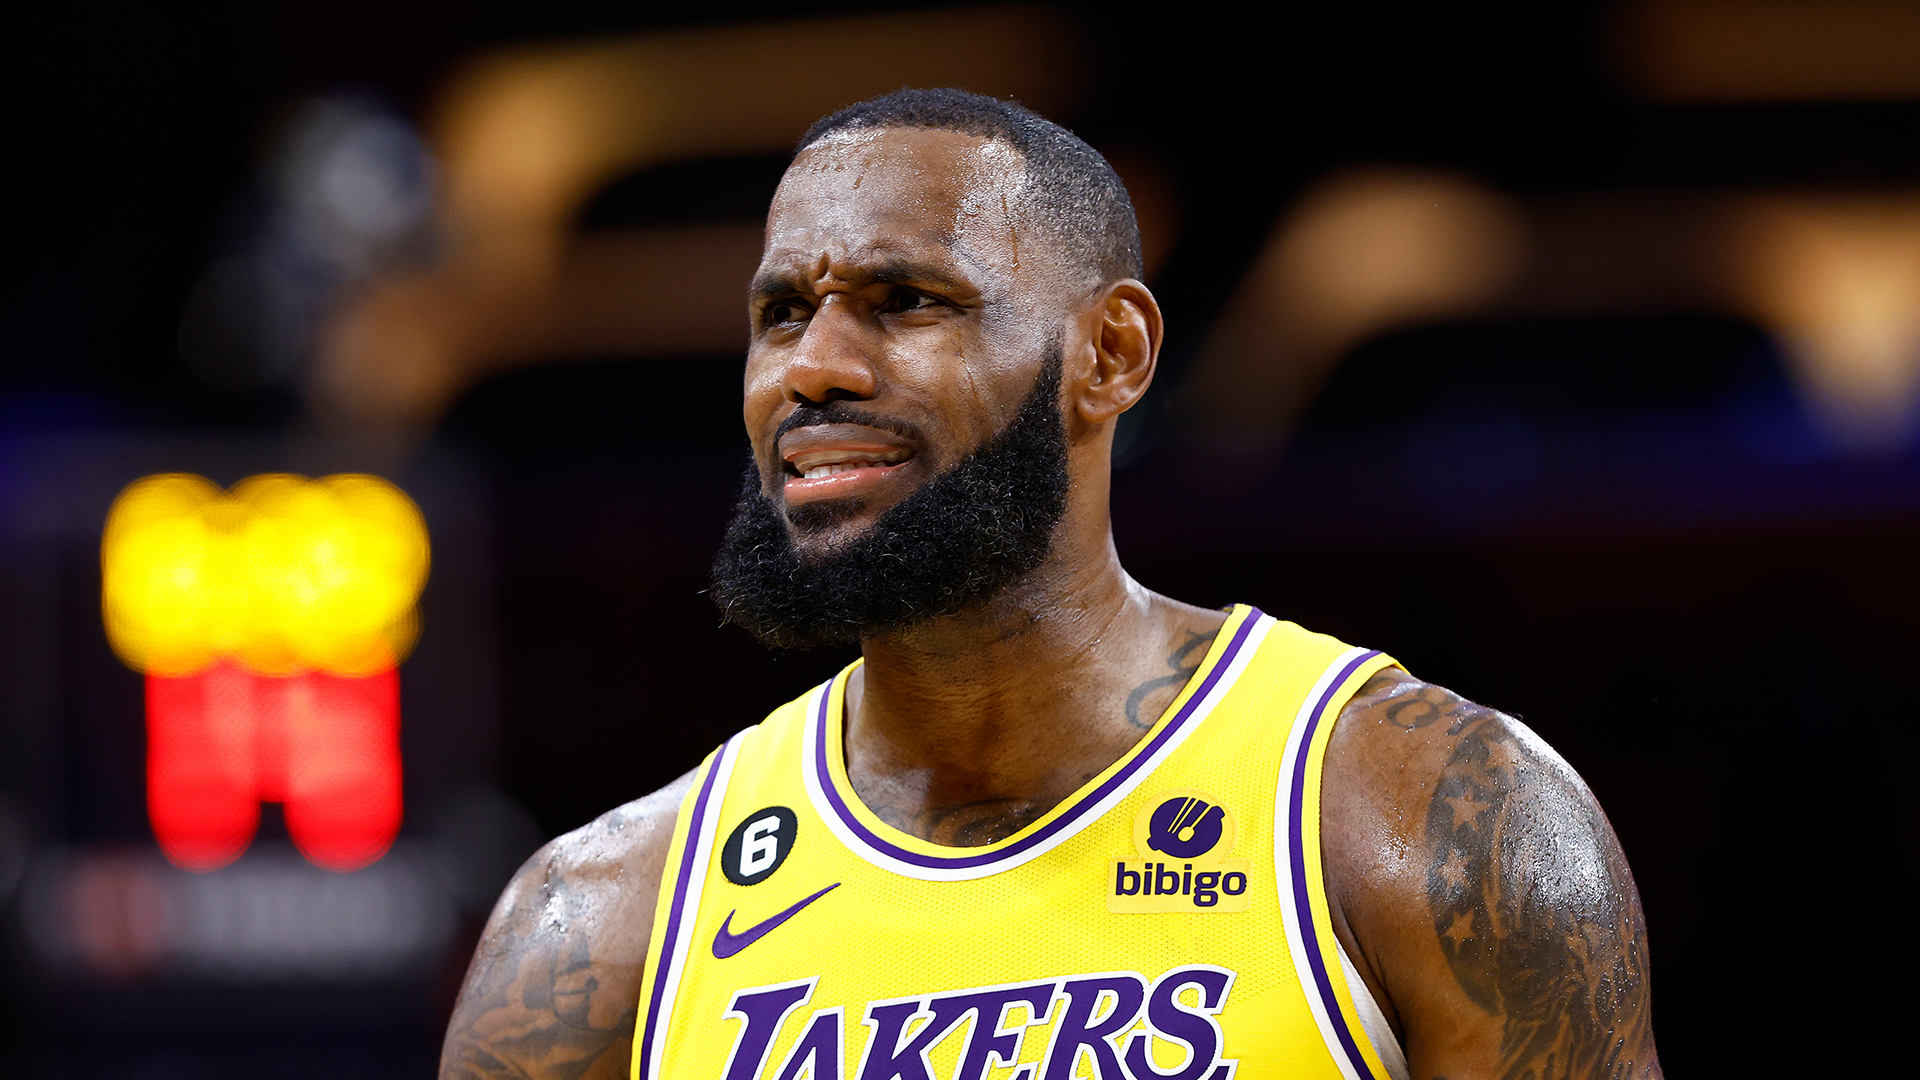 LeBron James queries why media asked him about Irving but not Jerry Jones, LeBron James